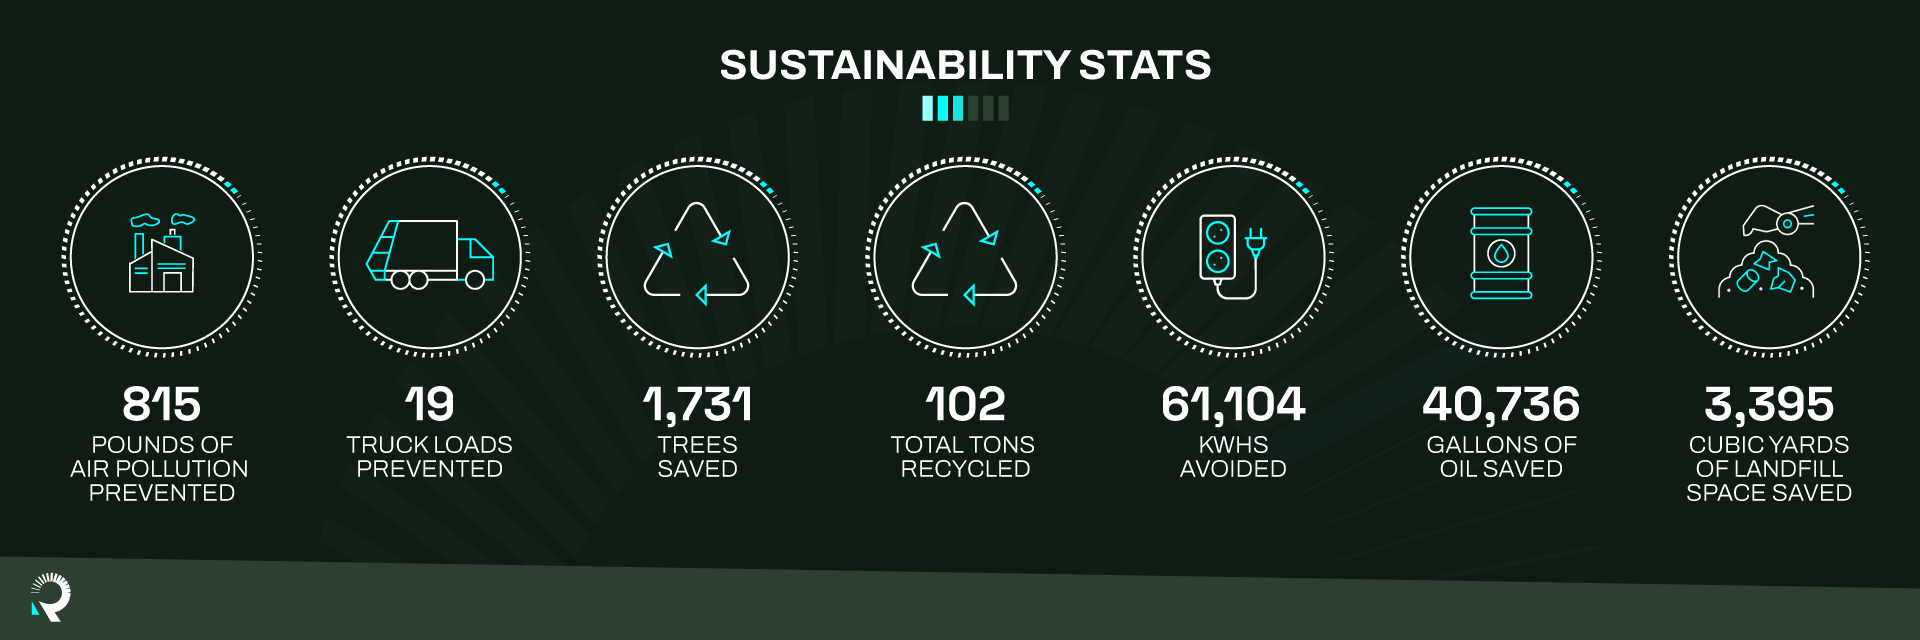 RR-CS-Brookfield-Properties-Sustainability-Stats-Infographic